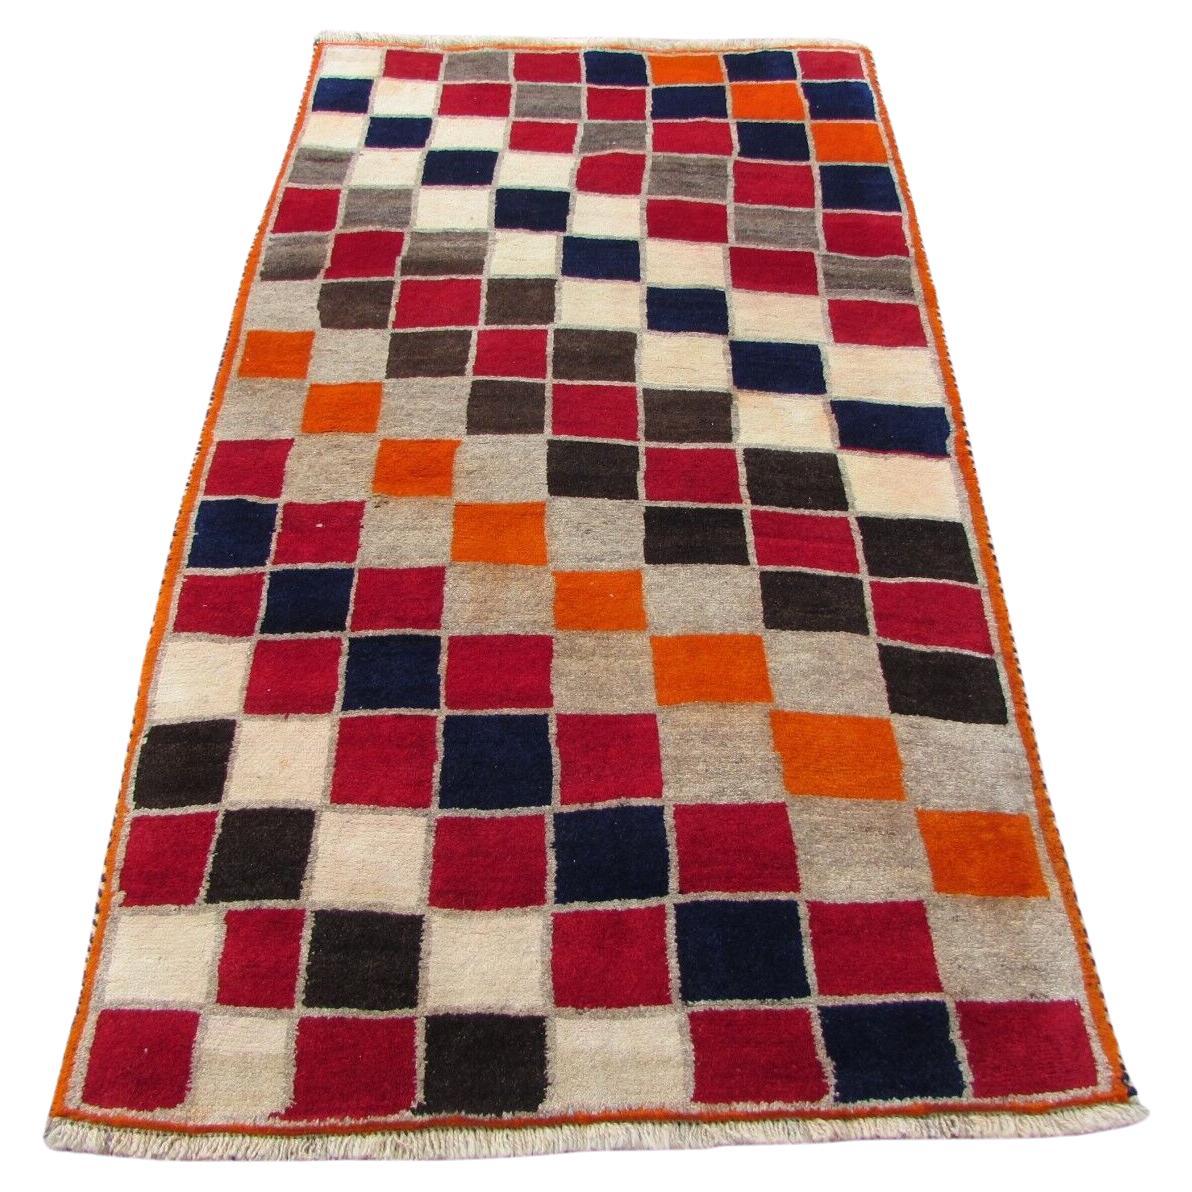 Handmade Vintage Persian Style Gabbeh Rug 3.4' x 5.9', 1970s, 1Q44 For Sale